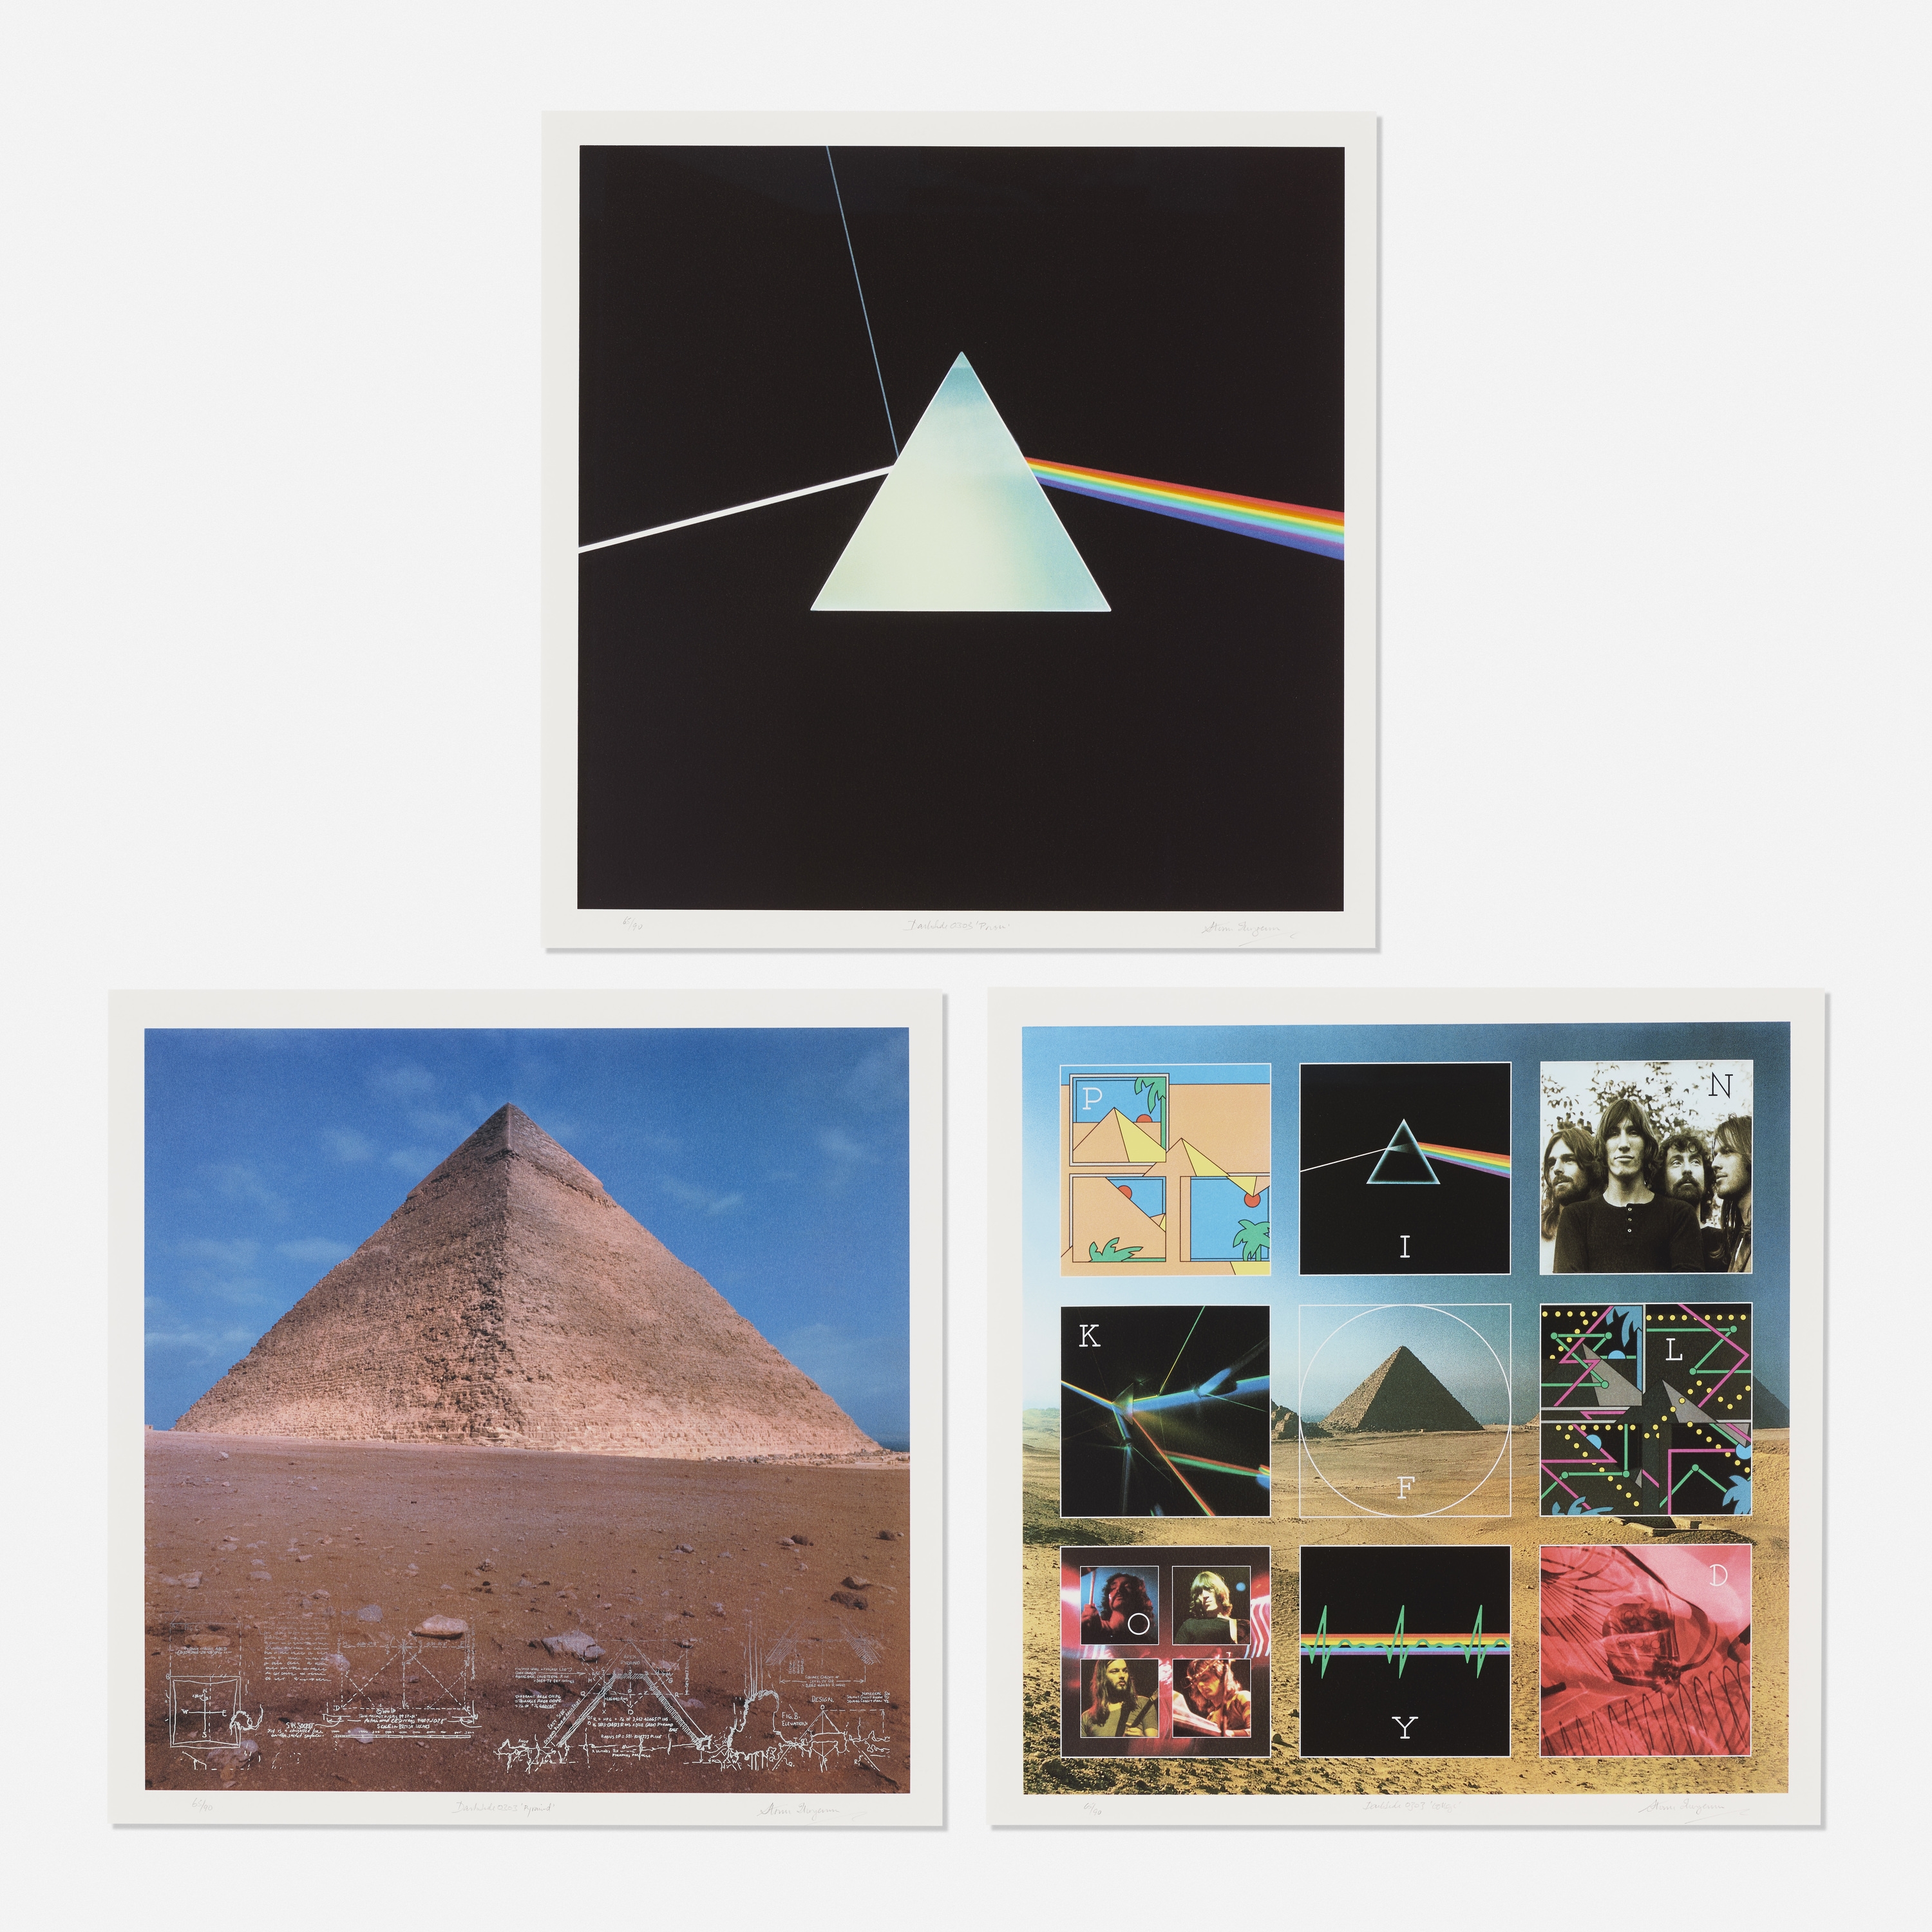 Three works from The Dark Side of the Moon 0303 Boxset by Storm Thorgerson, circa 1973 / 2003